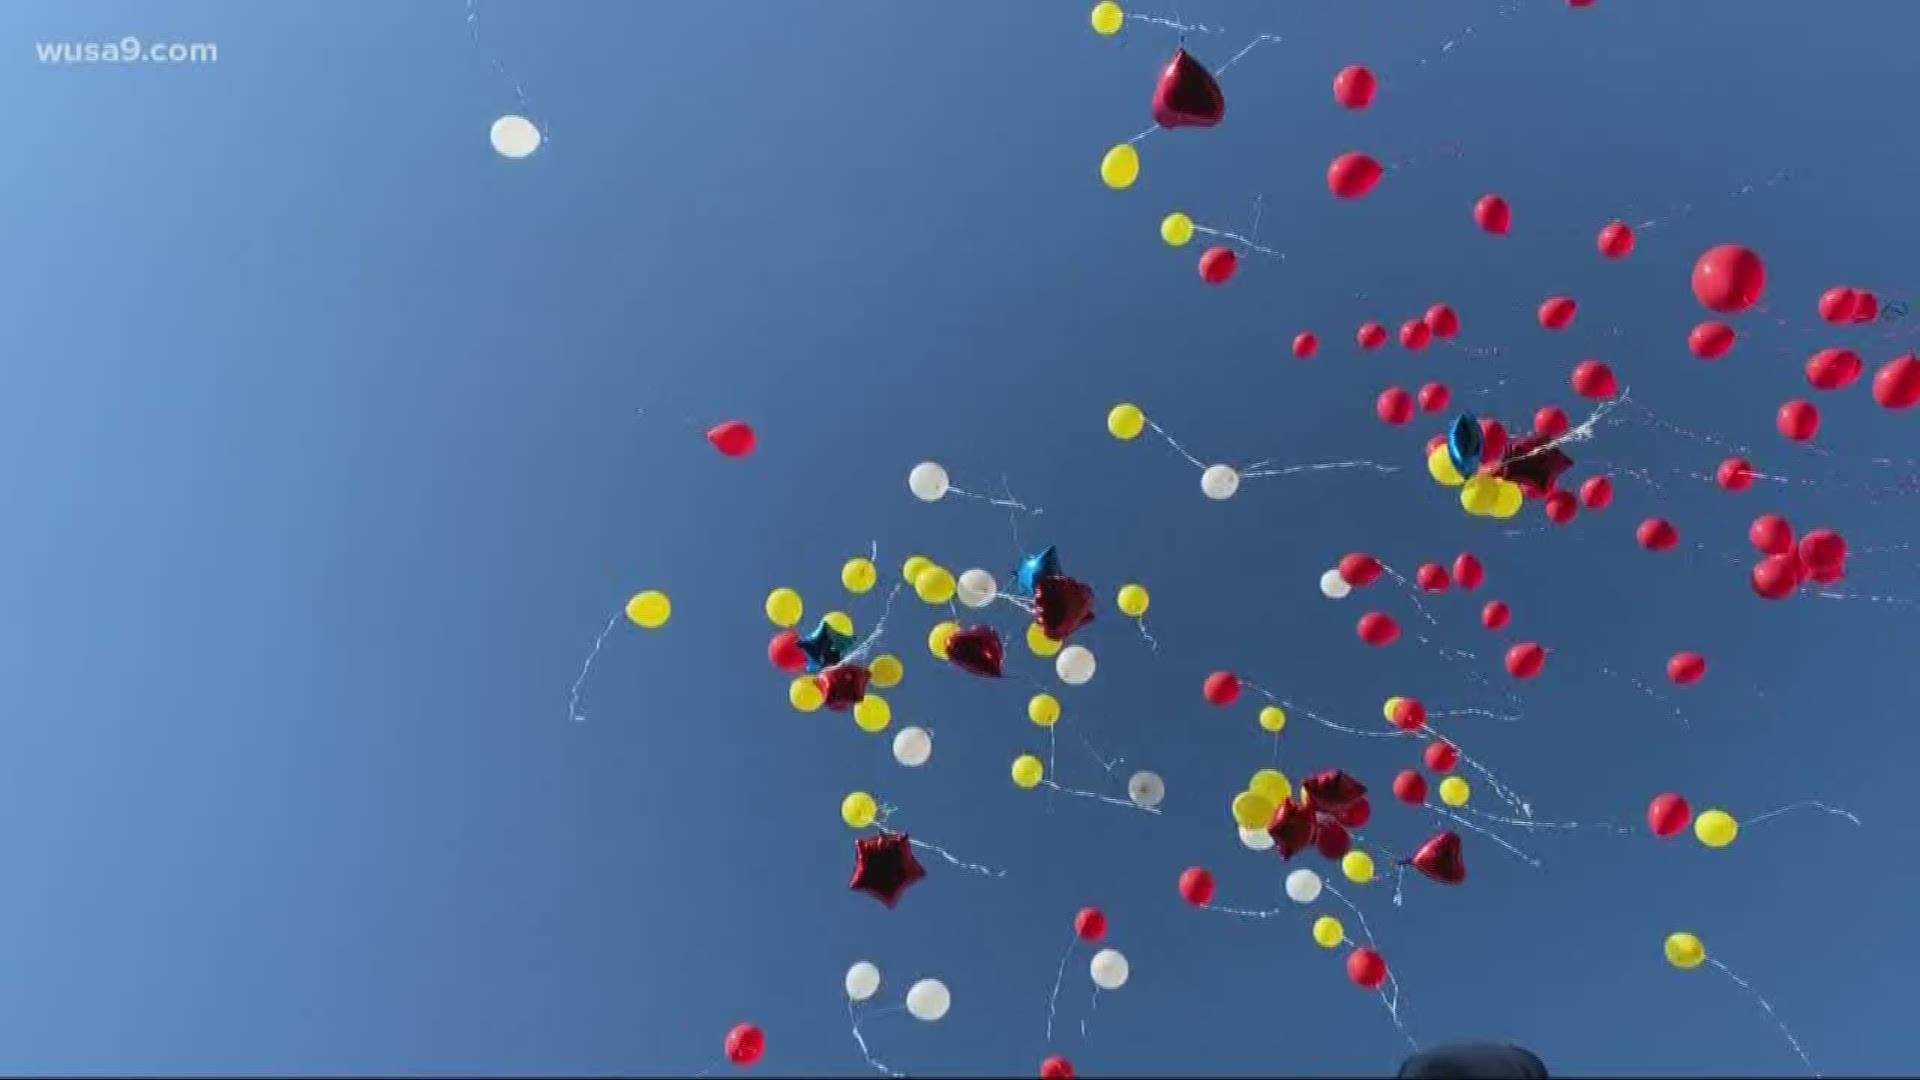 Lawmakers in one Maryland county want the practice of intentionally releasing balloons into the atmosphere to float away...for good.